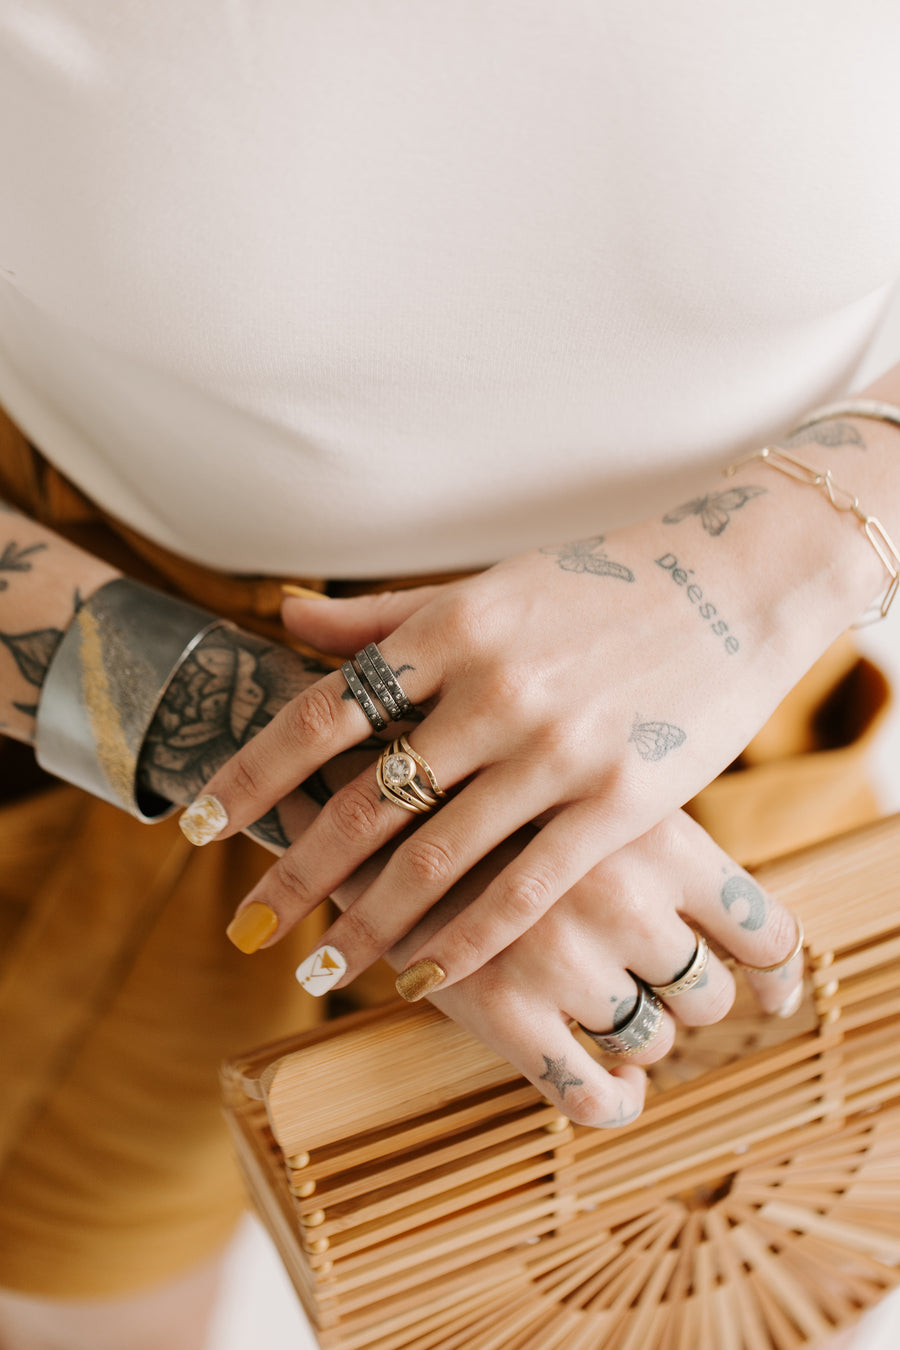 30 Meaningful Wedding Ring Tattoos for 2020 - hitched.co.uk - hitched.co.uk